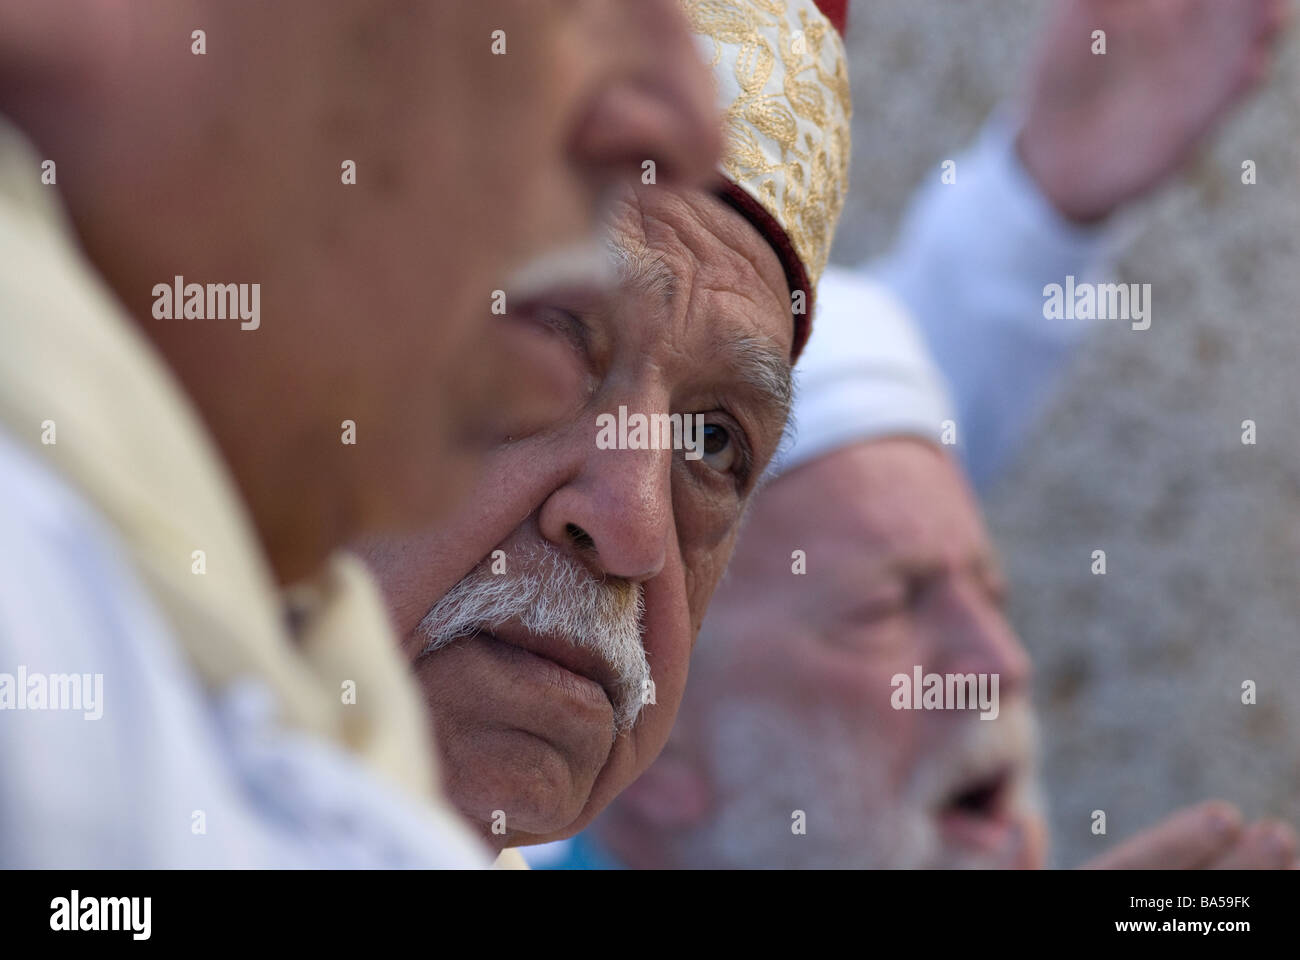 Members of the Samaritan sect with ancient roots in Judaism celebrating the Passover feast on mount Gerizim in West Bank Israel Stock Photo